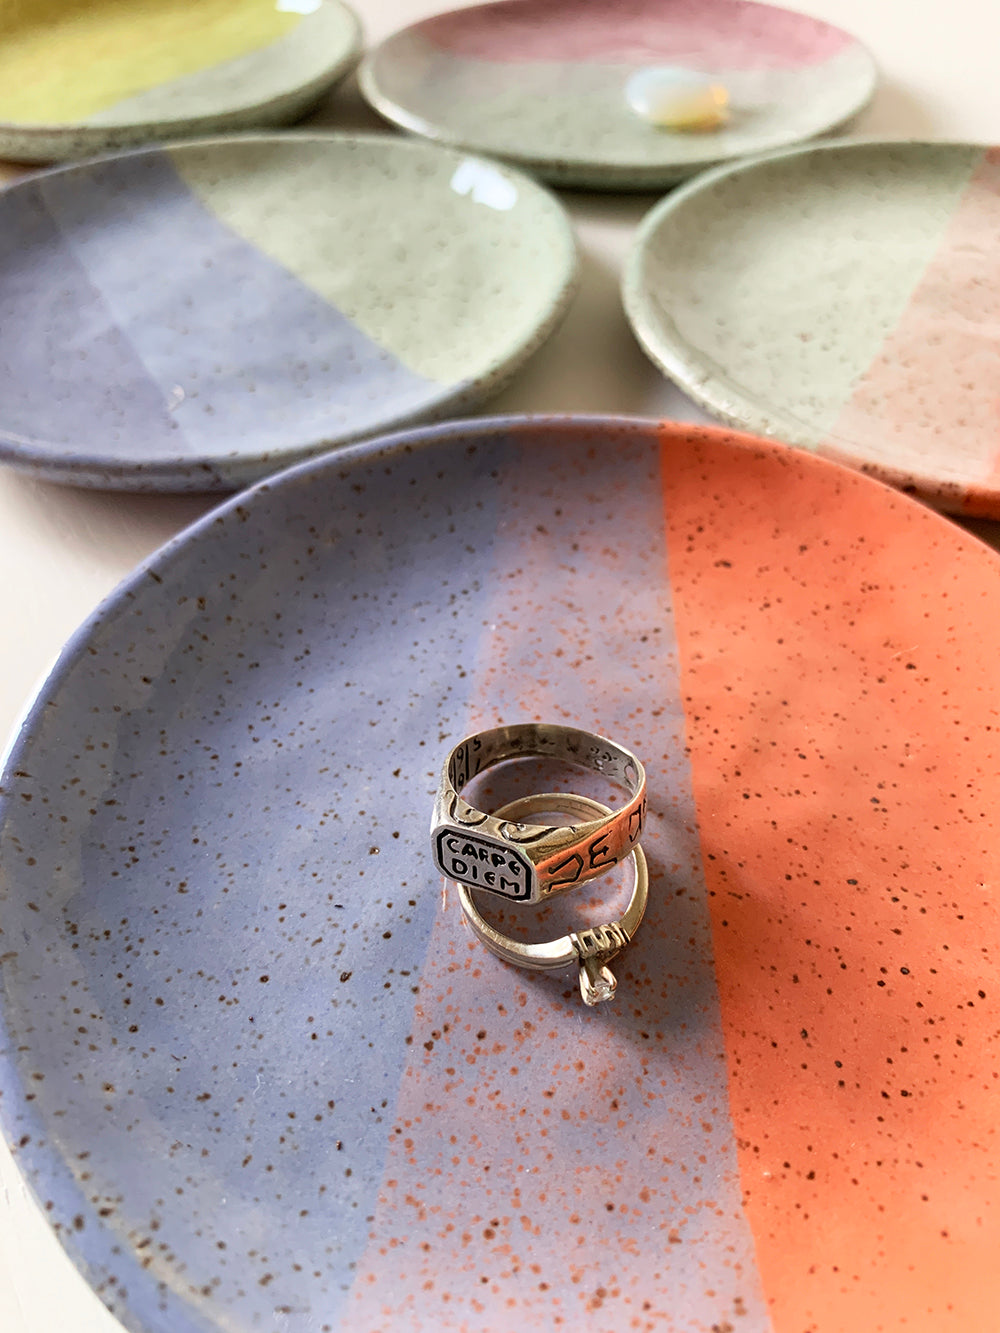 Brighter Days Stoneware Trinket Tray - Available in Assorted Colors